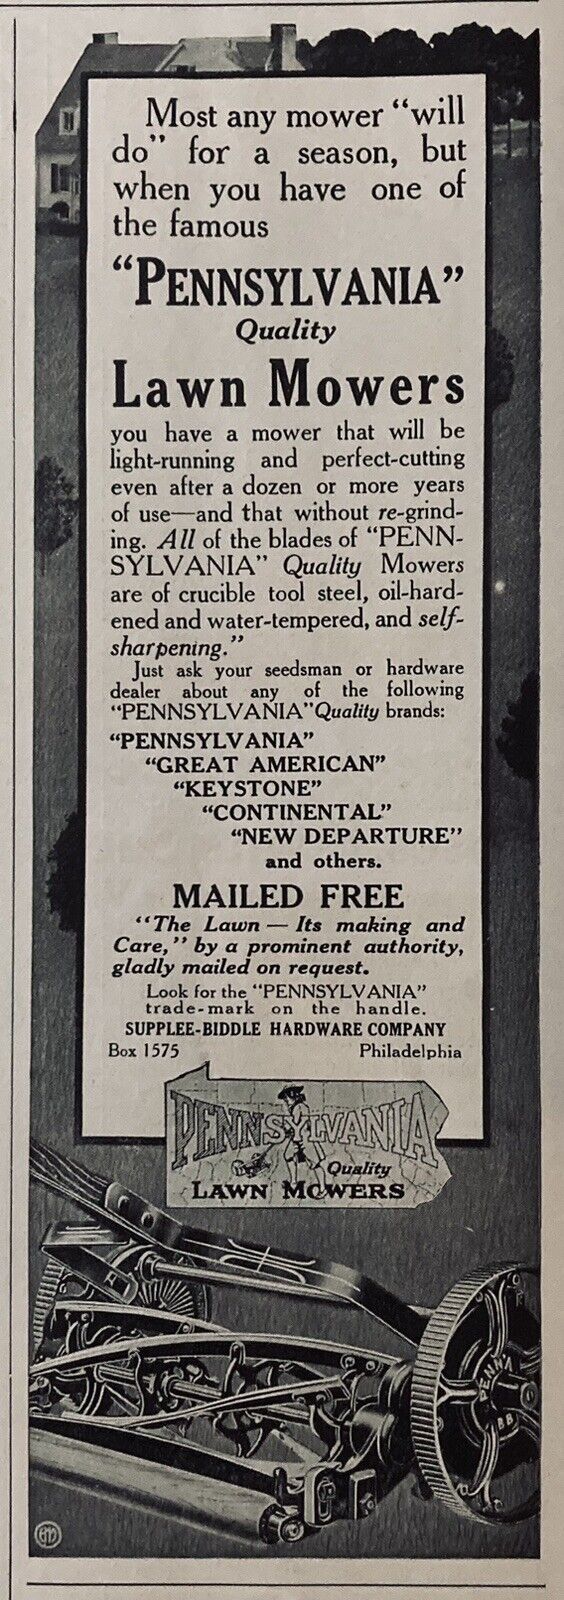 1914 AD.(XH69)~SUPPLEE-BIDDLE HARDWARE CO. PHIL., PA. “PENNSYLVANIA” LAWN MOWERS